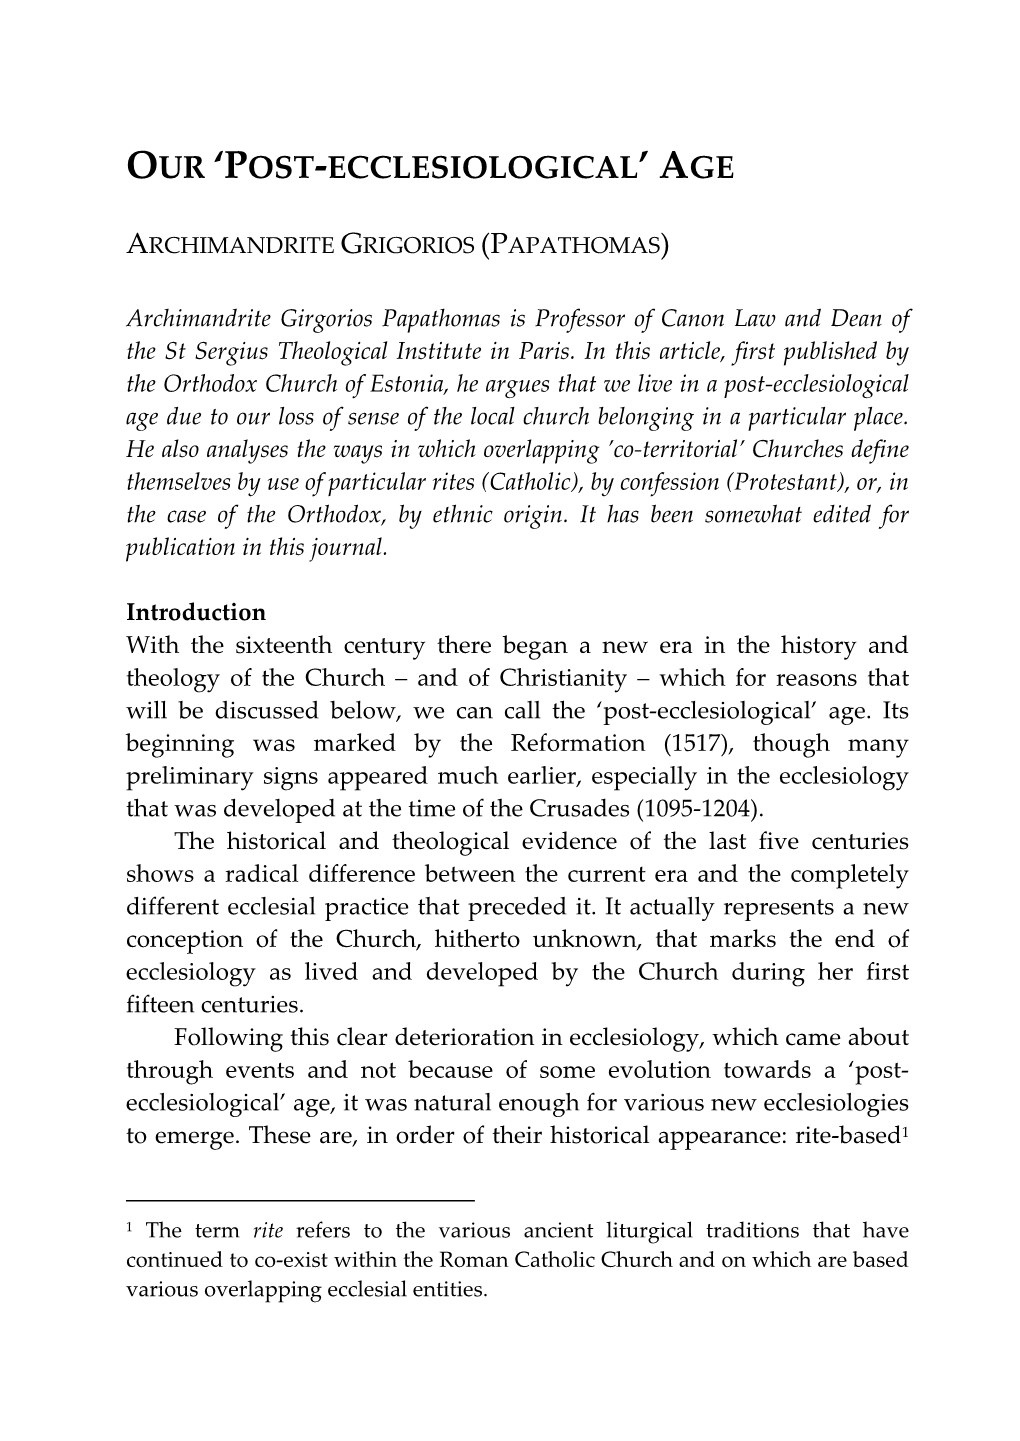 Our 'Post-Ecclesiological'